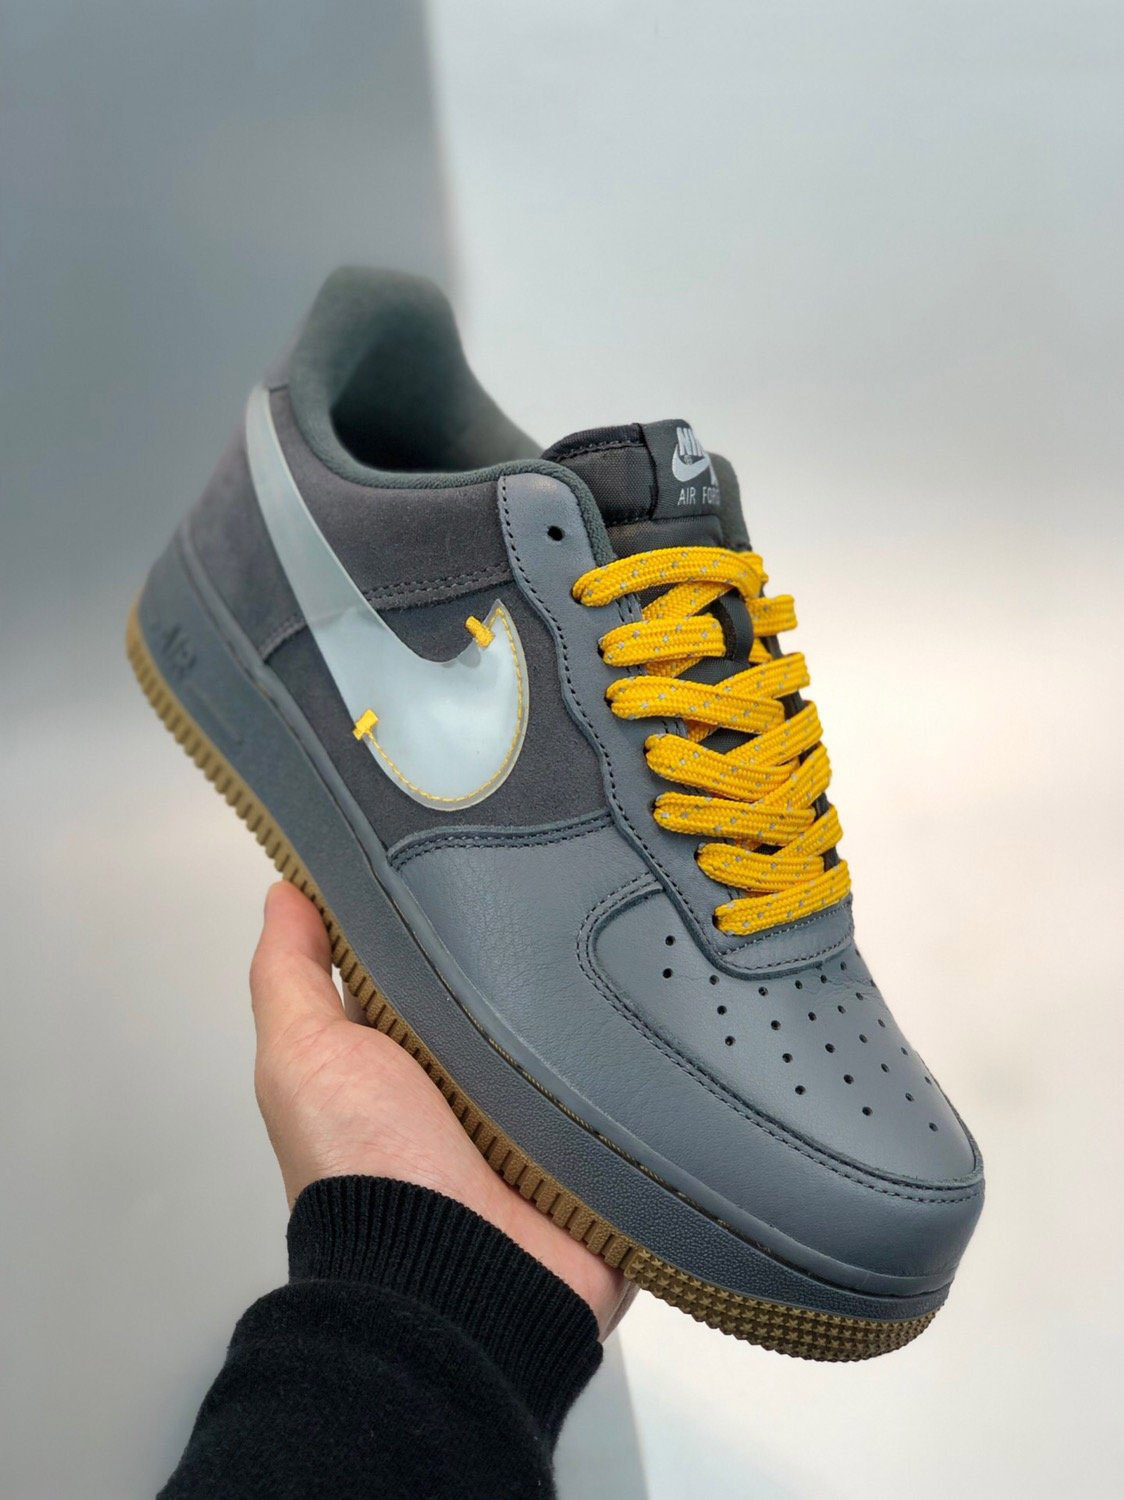 Nike Air AF Force 1 Low Cool Grey Yellow CQ6367-001 Shoes